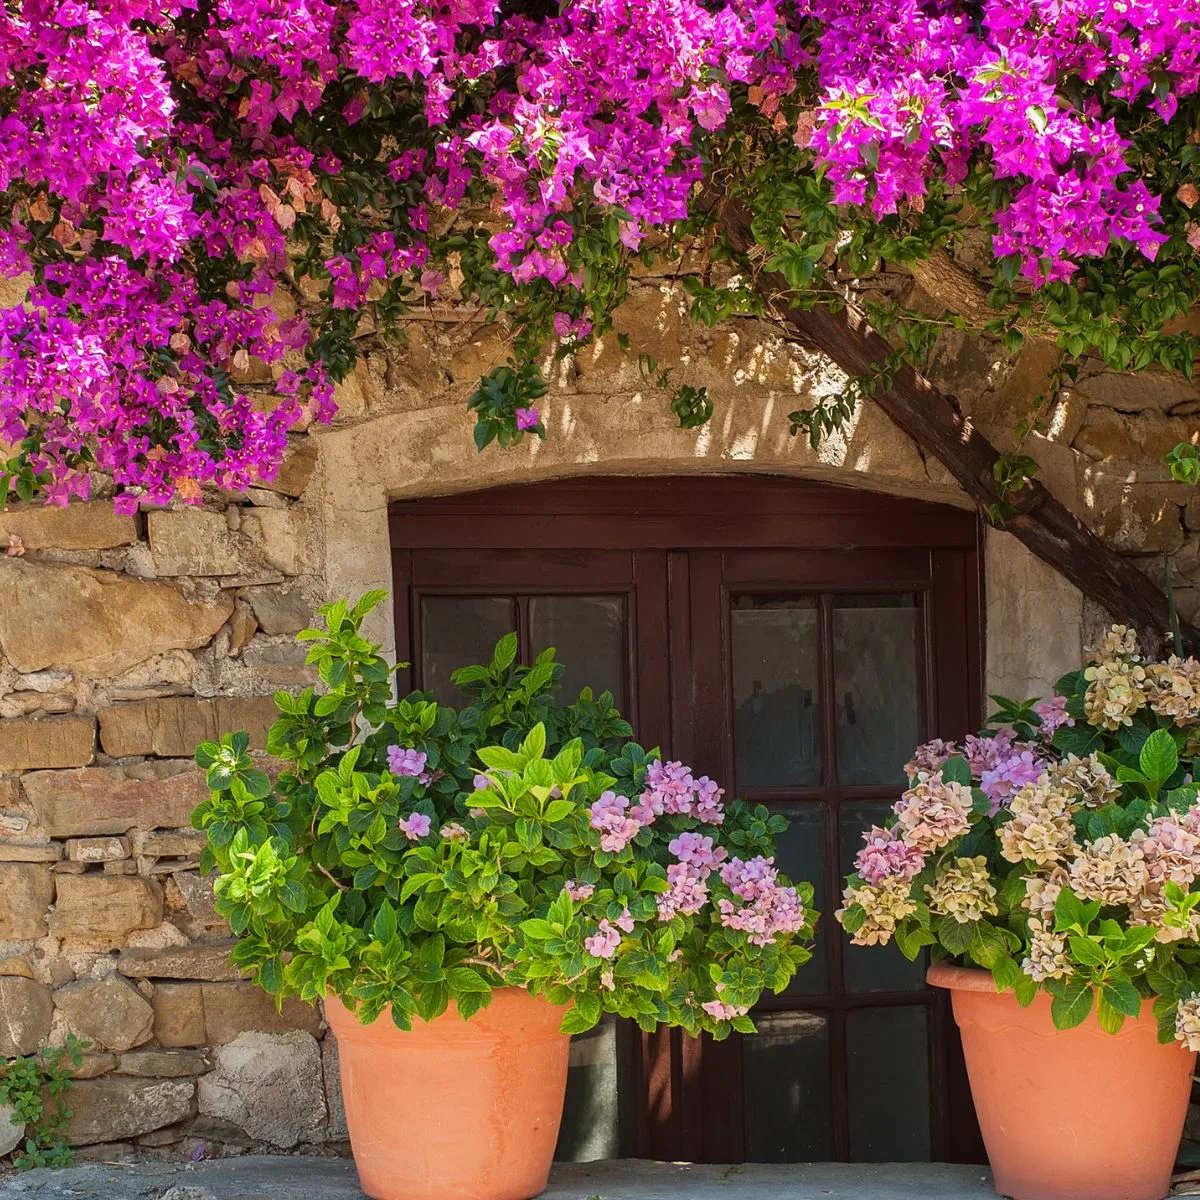 Italian house exterior decorated with hydrangea in flower pots and Bougainvillea tree.